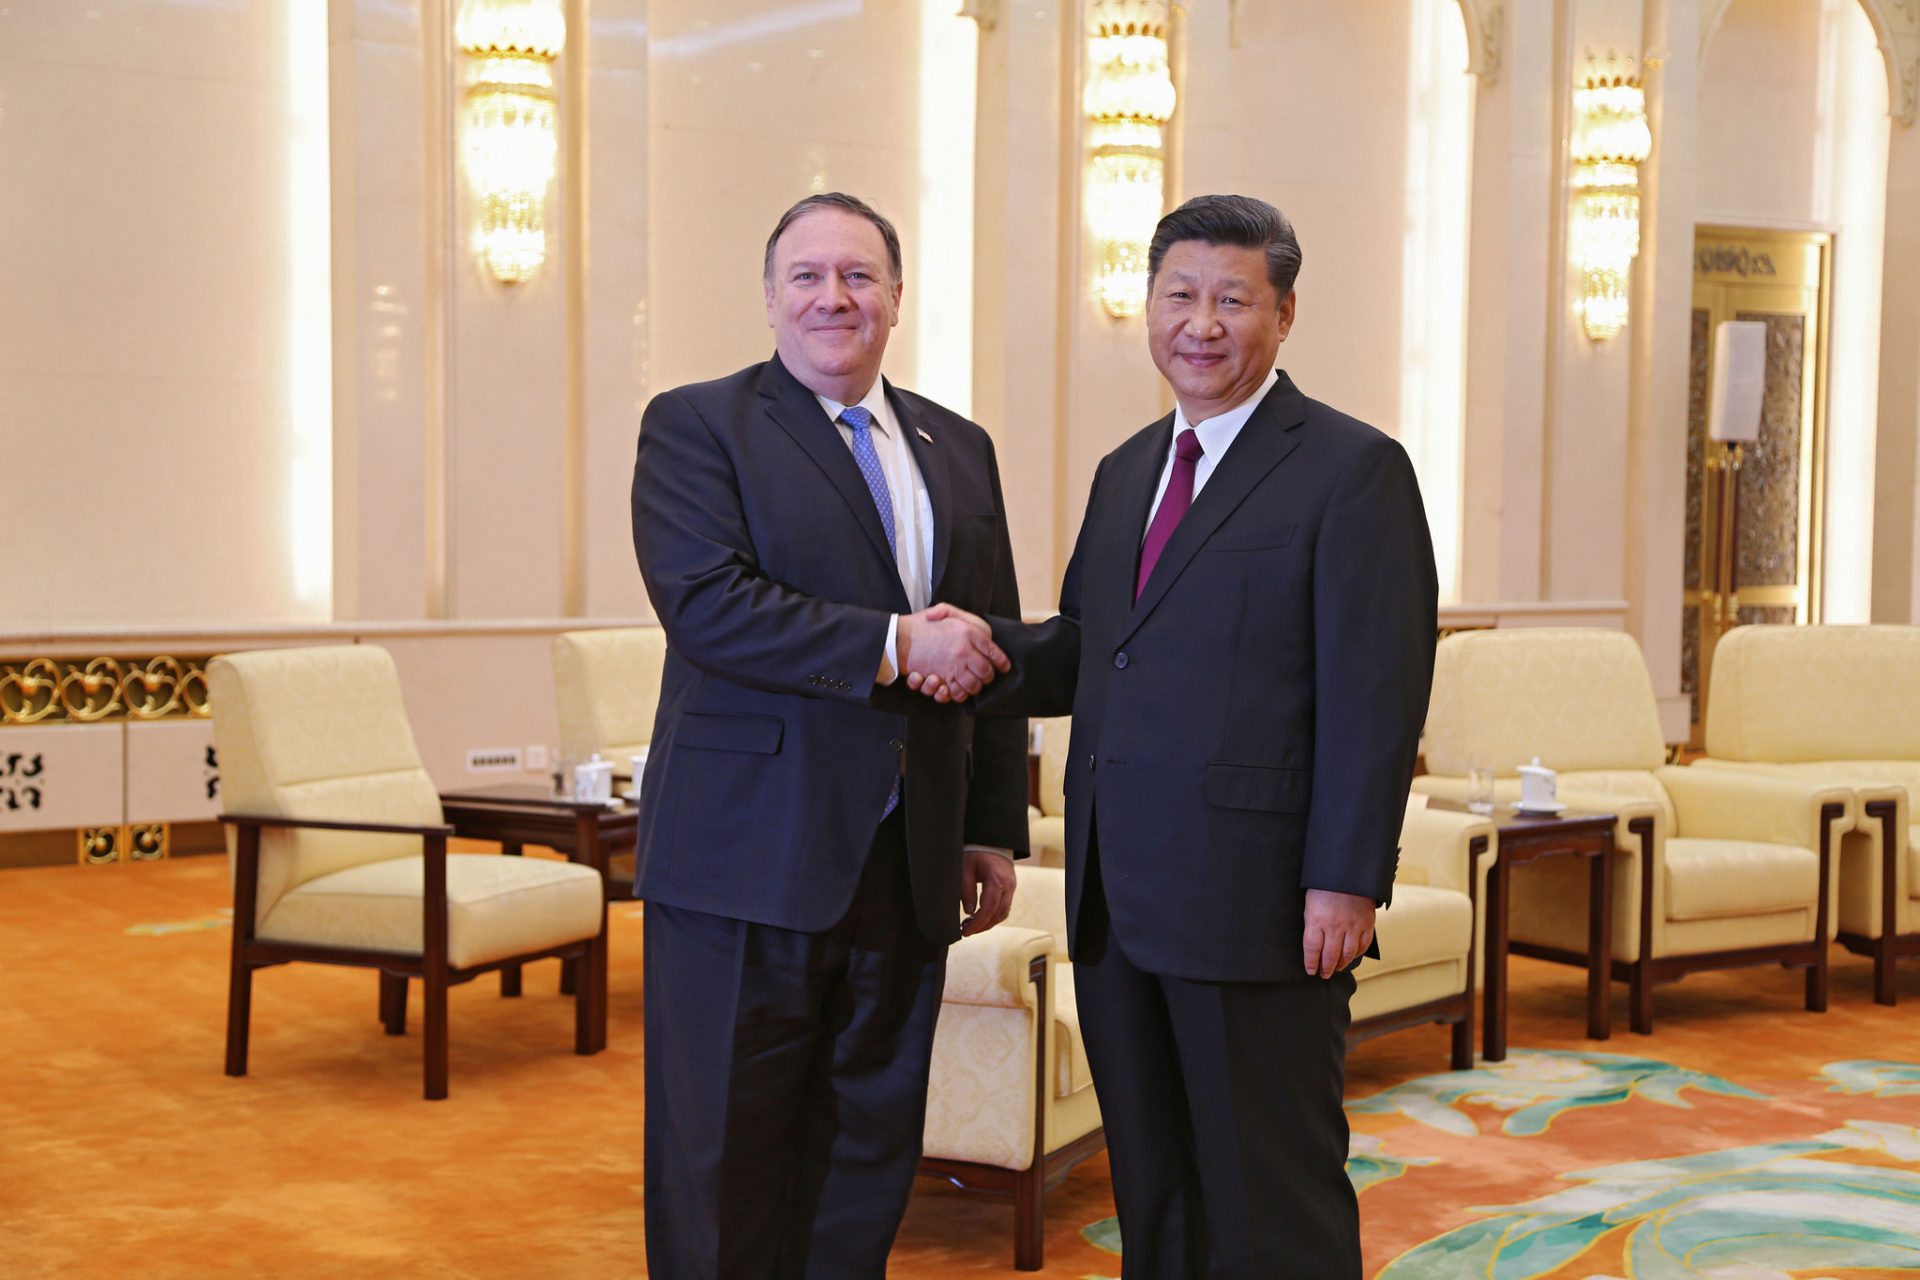 U.S. Secretary of State Mike Pompeo meets with Chinese President Xi Jinping at the Great Hall of the People in Beijing, China on June 14, 2018.